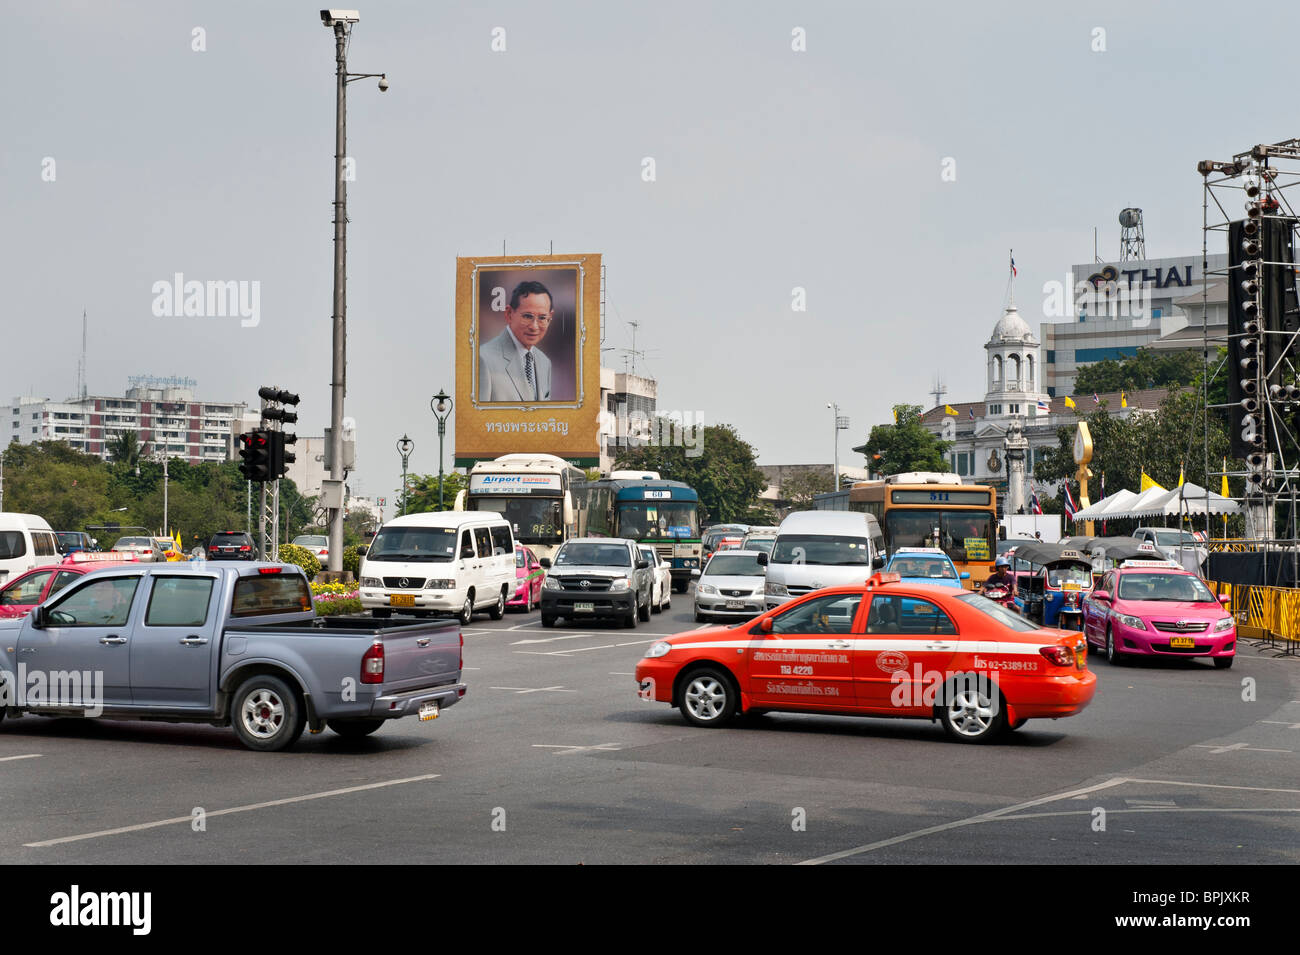 The main road in old Bangkok was flooded with images of the King of Thailand because of his birthday earlier on the 5th of Dec. Stock Photo